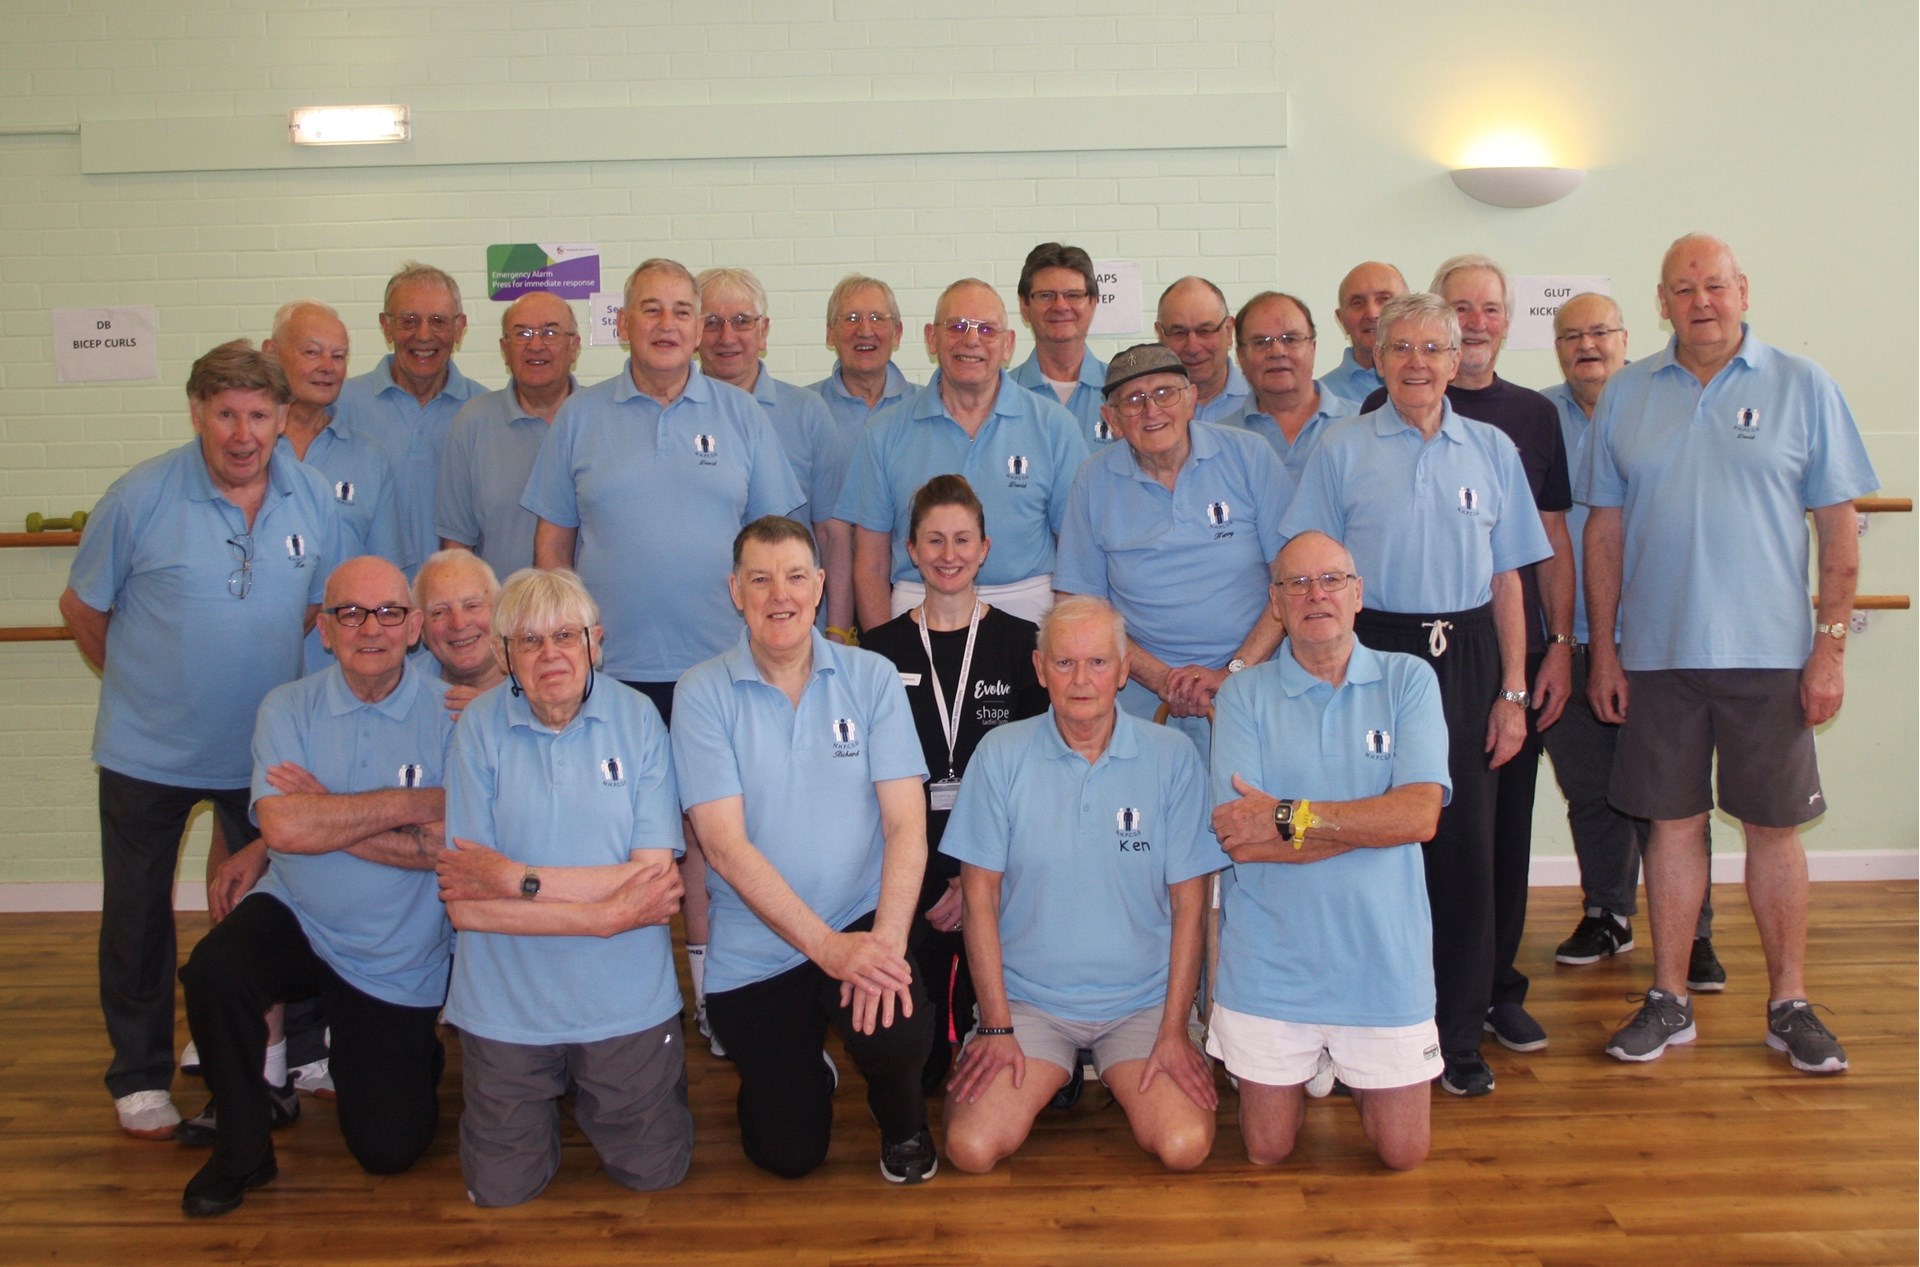 North Hampshire Prostate Cancer Support Group Exercise Group